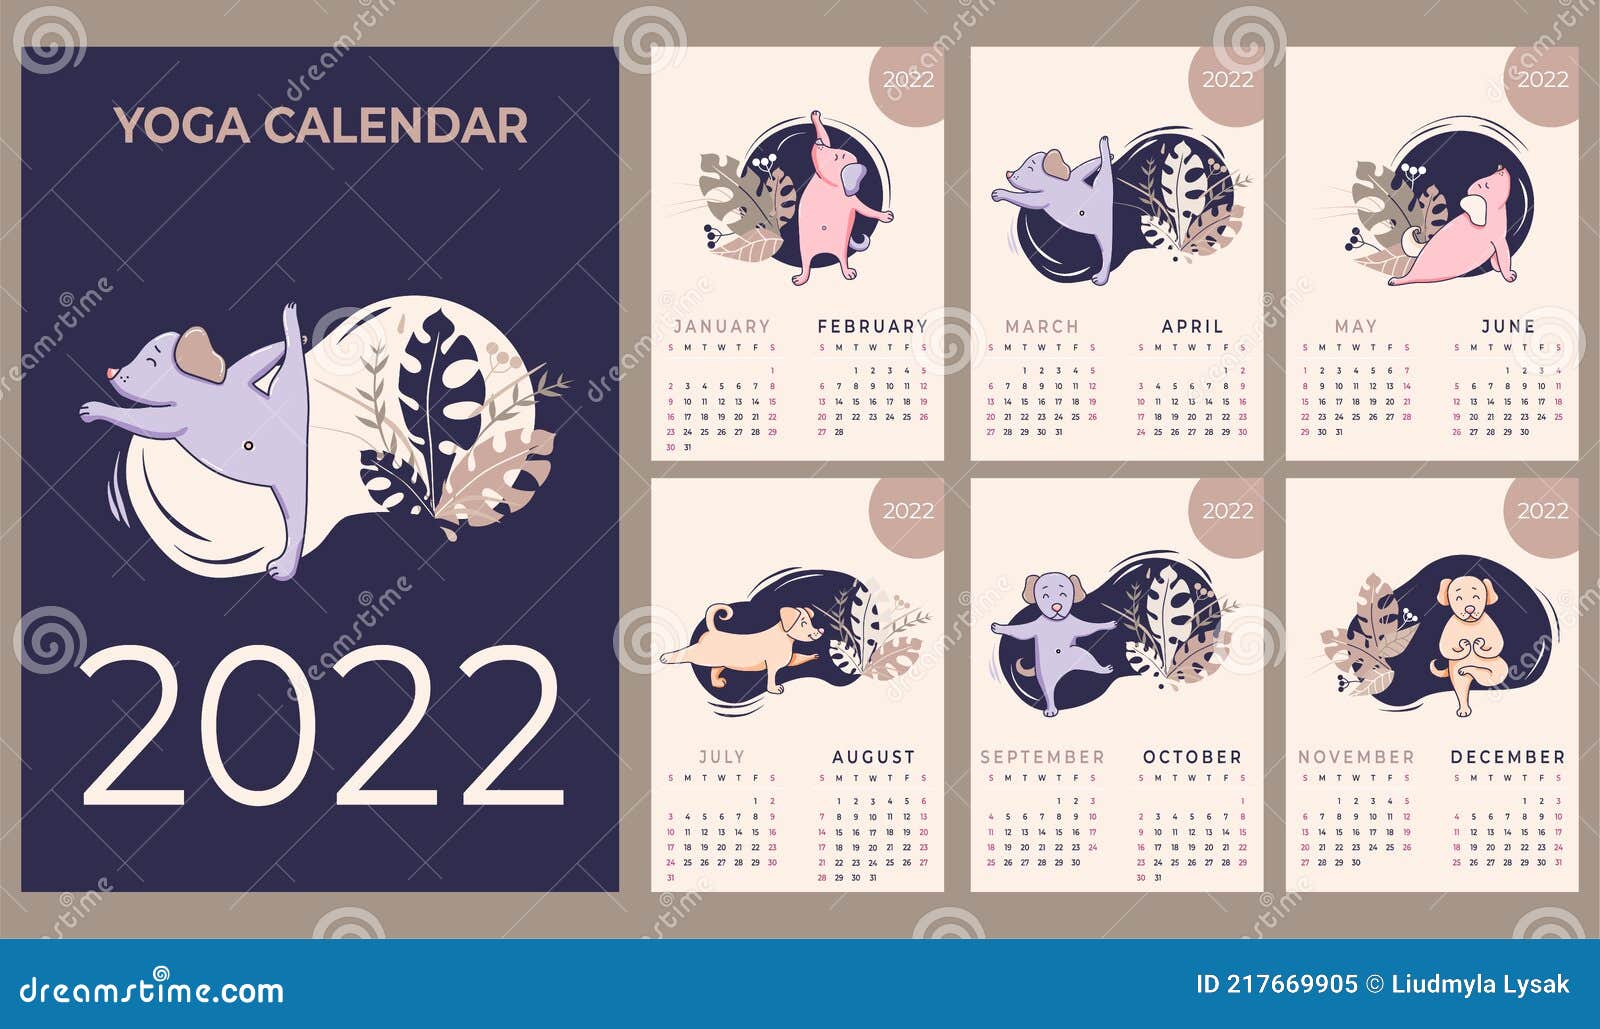 Cute Calendar 2022 Calendar 2022. Yearly Calendar. Concept Design - Yoga For Pets. Vector. Set  Of Templates For 12 Months 2022 With Cute Stock Vector - Illustration Of  Sport, Business: 217669905